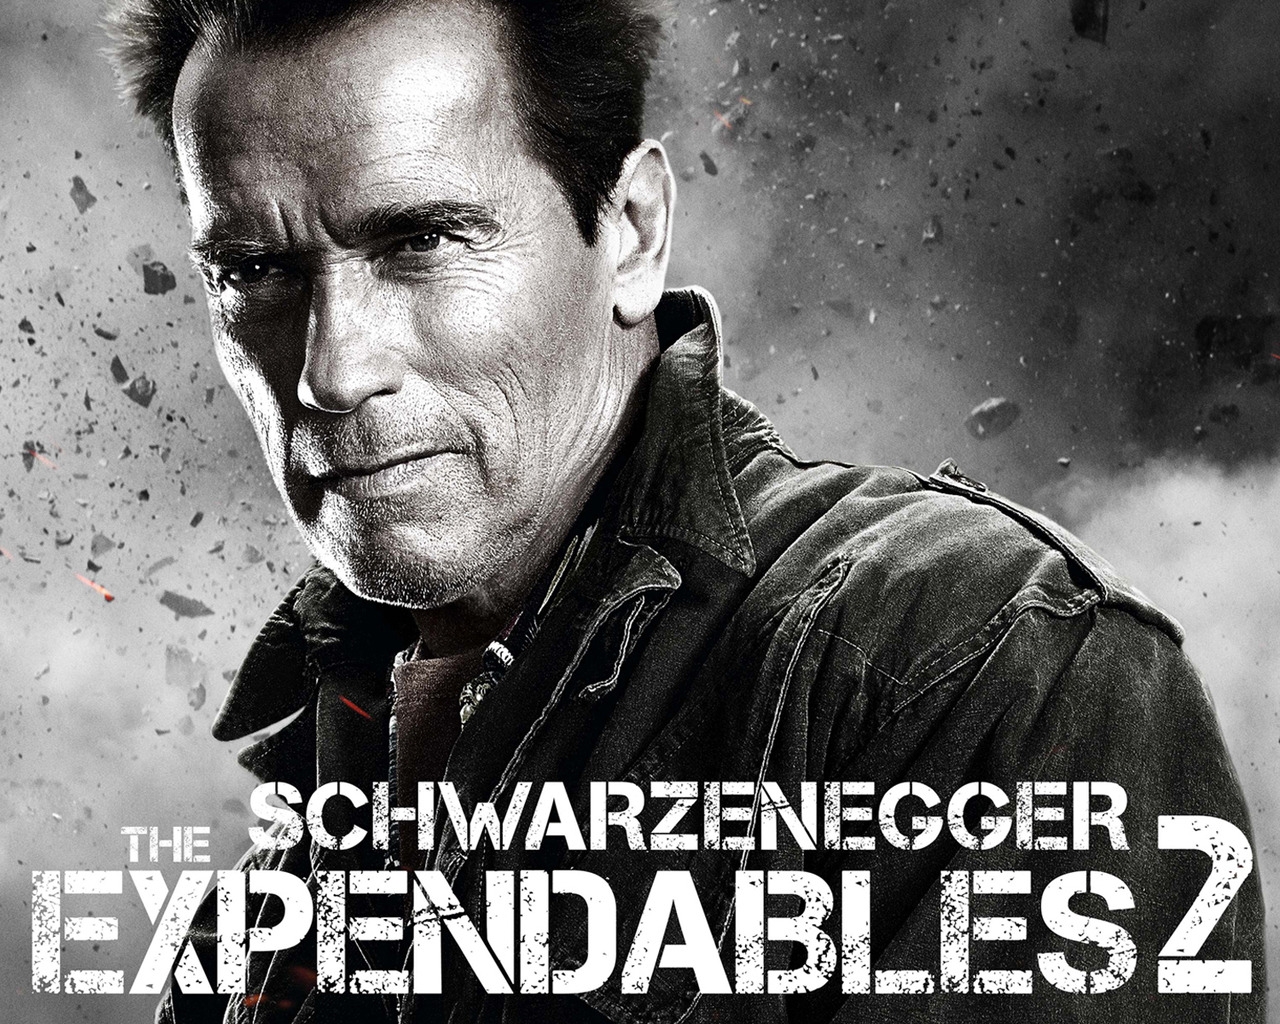 Arnold Schwarzenegger Expendables 2 for 1280 x 1024 resolution